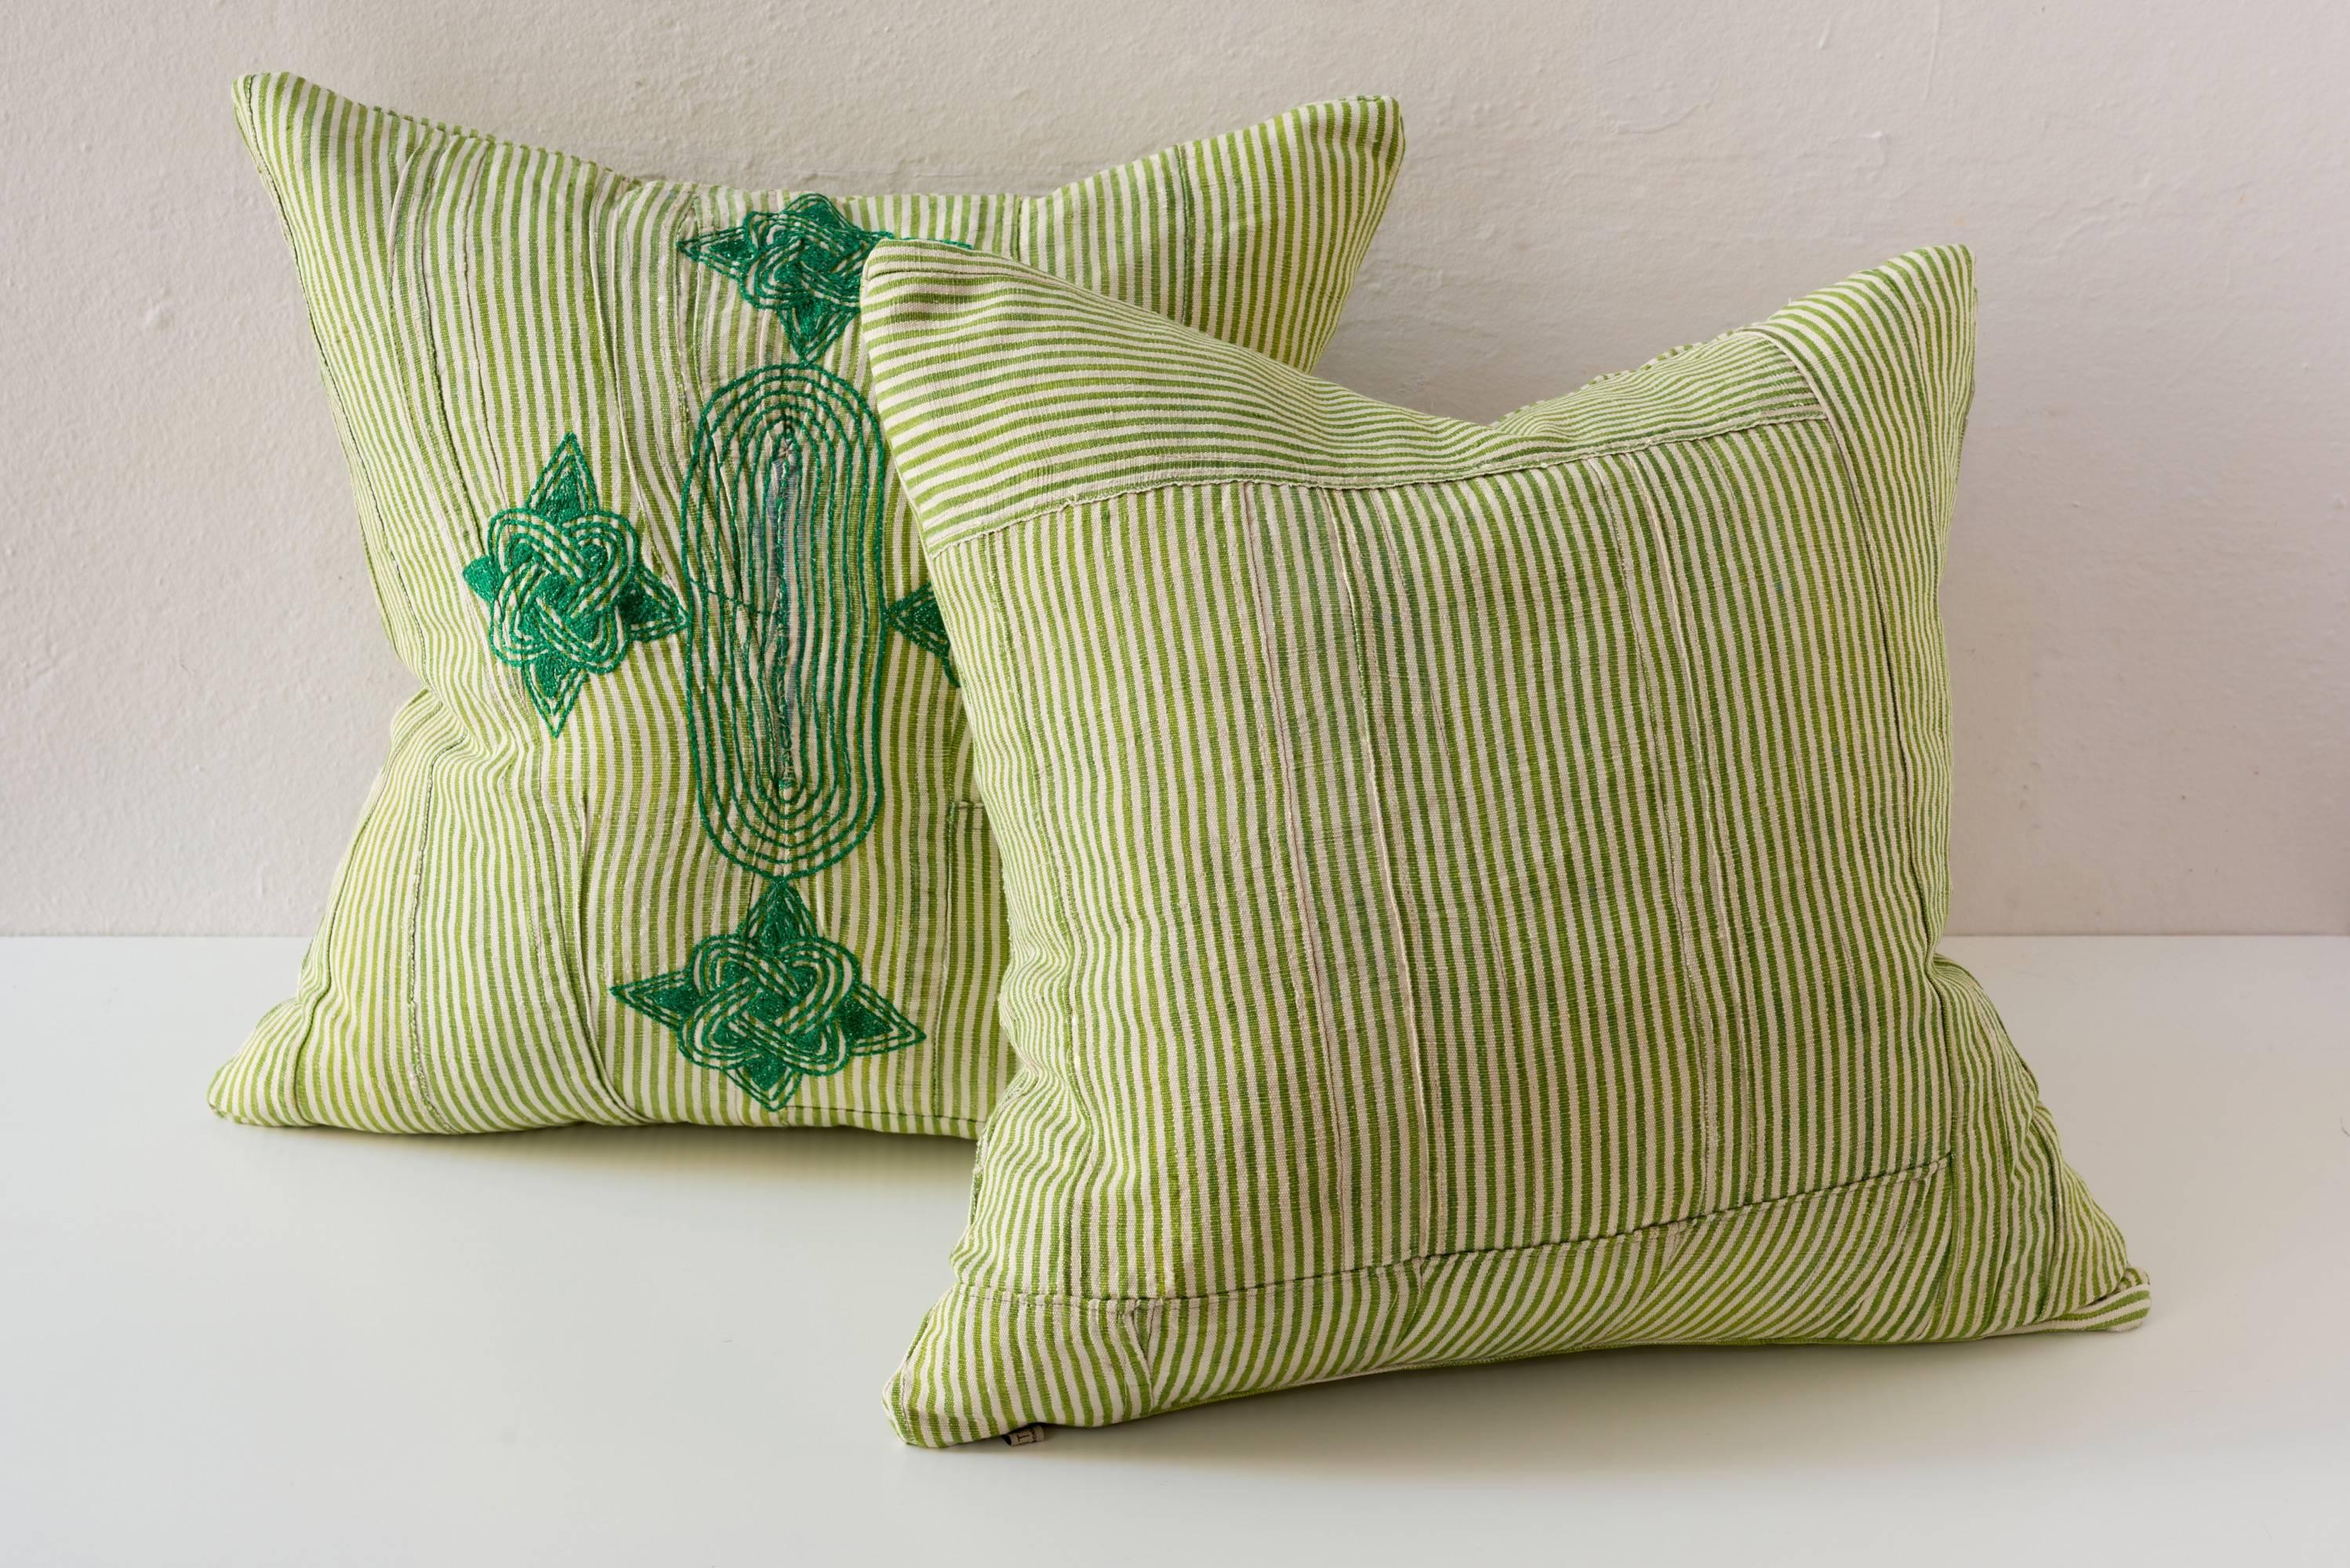 Cotton Vintage Grand Boubou Textile Pillow in Greens For Sale